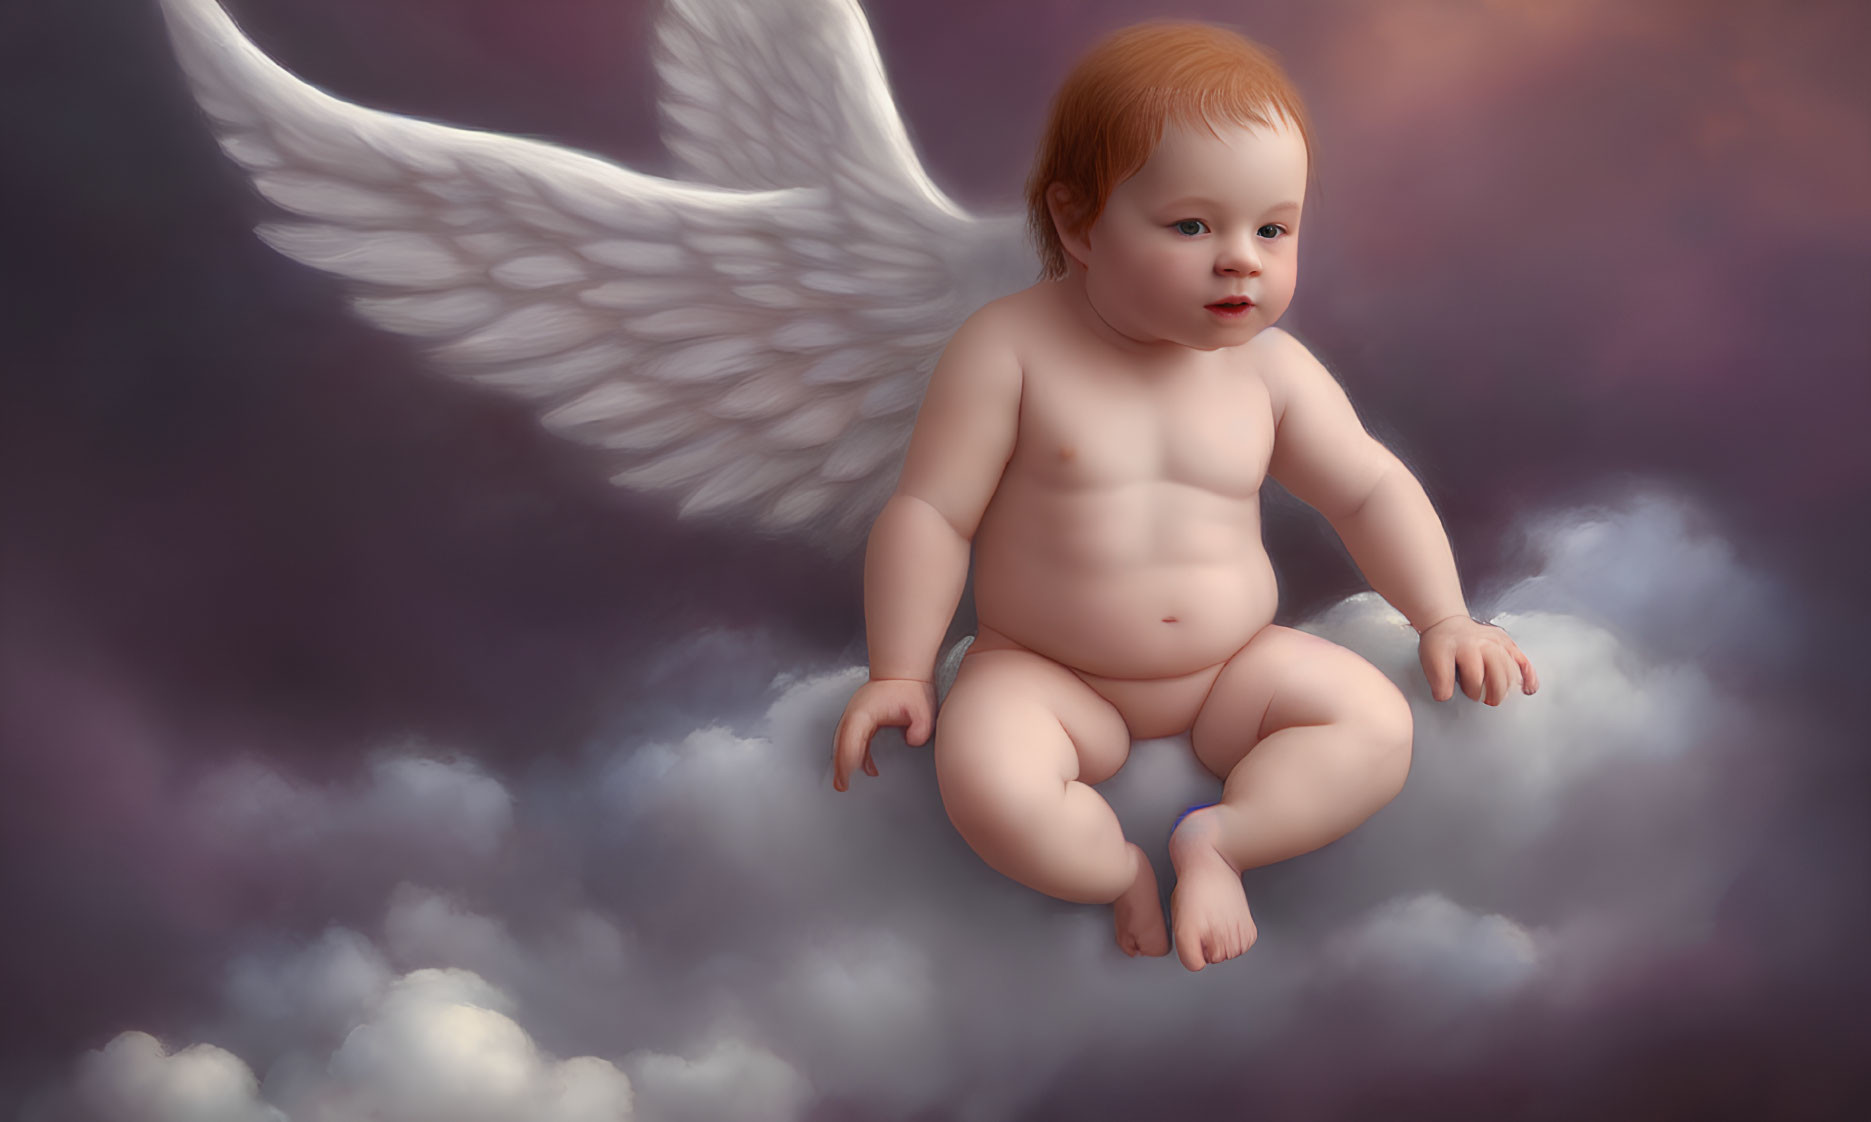 Cherubic baby with wings in fluffy clouds against purple sky